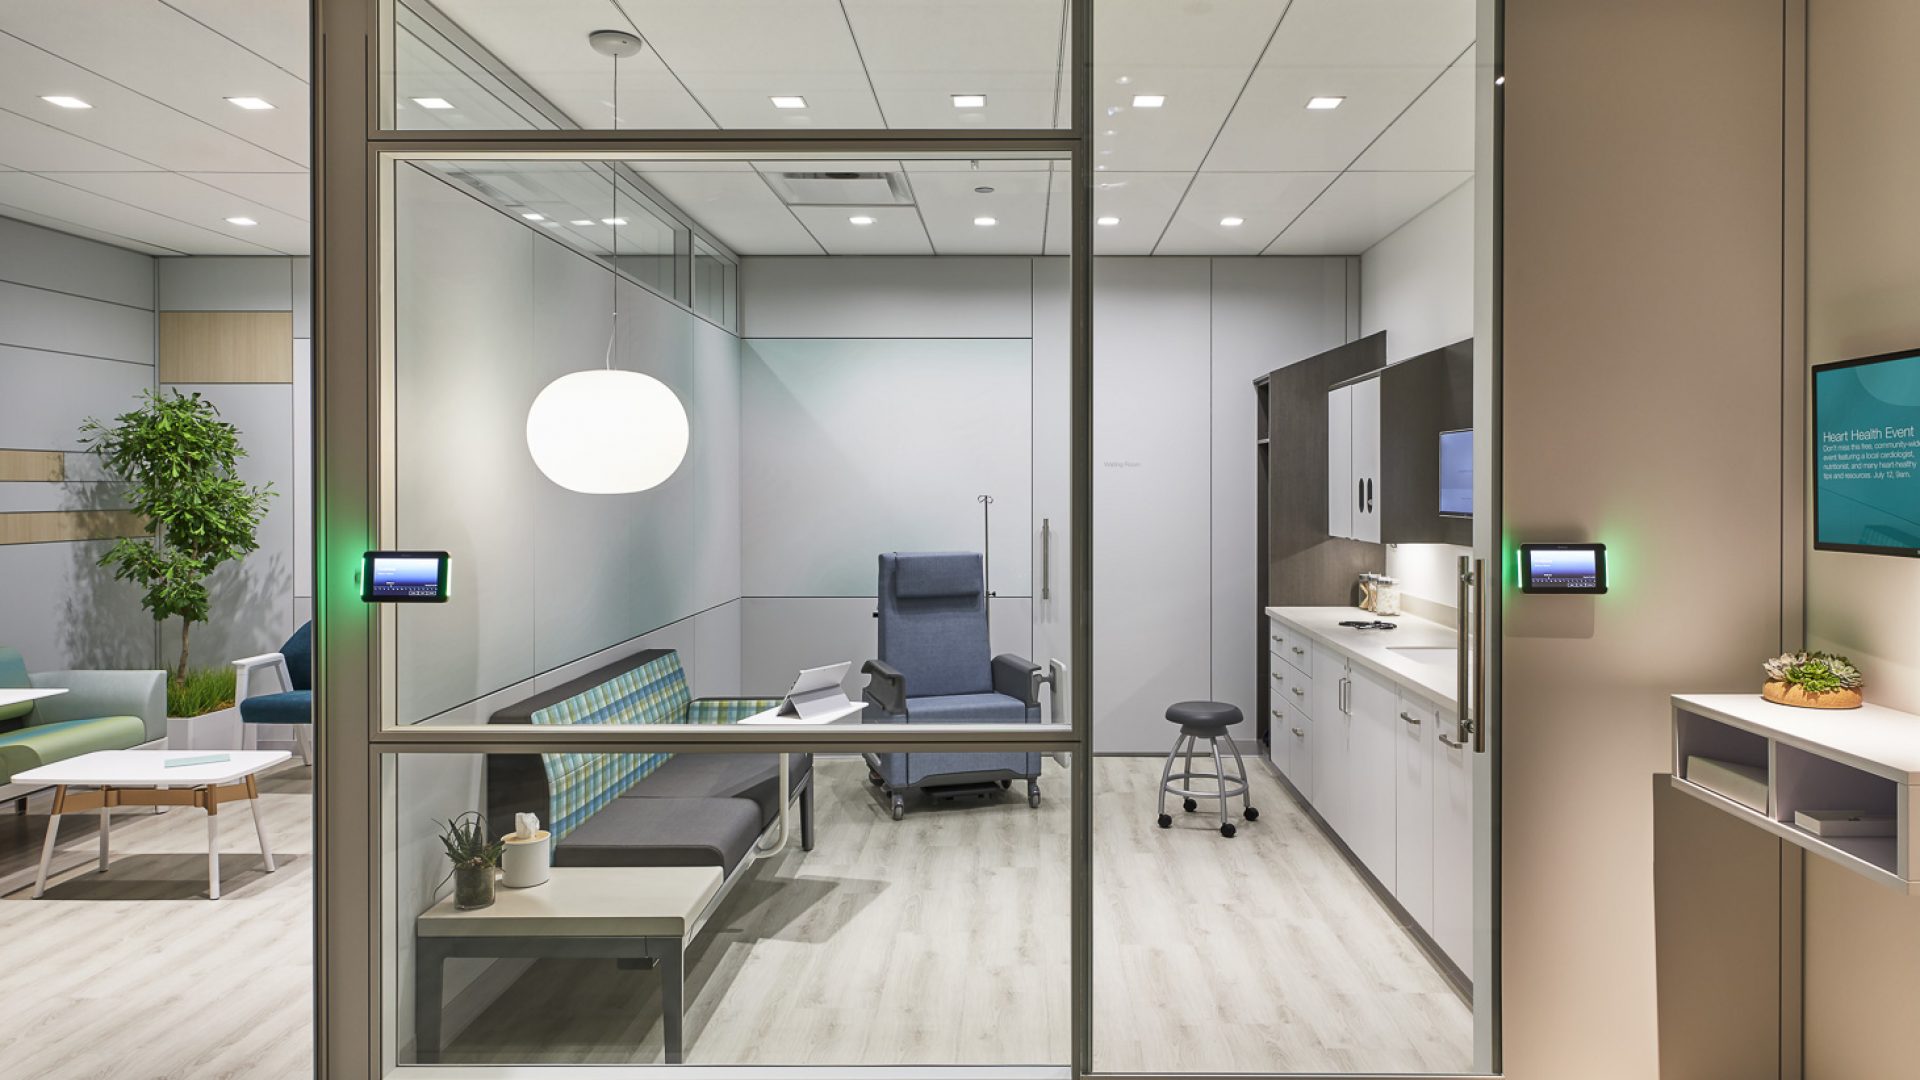 Custer's specialized healthcare team is trained to meet the unique needs of our diverse healthcare customers. From private practices to expansive health systems, Custer designs and builds exceptional healing spaces.